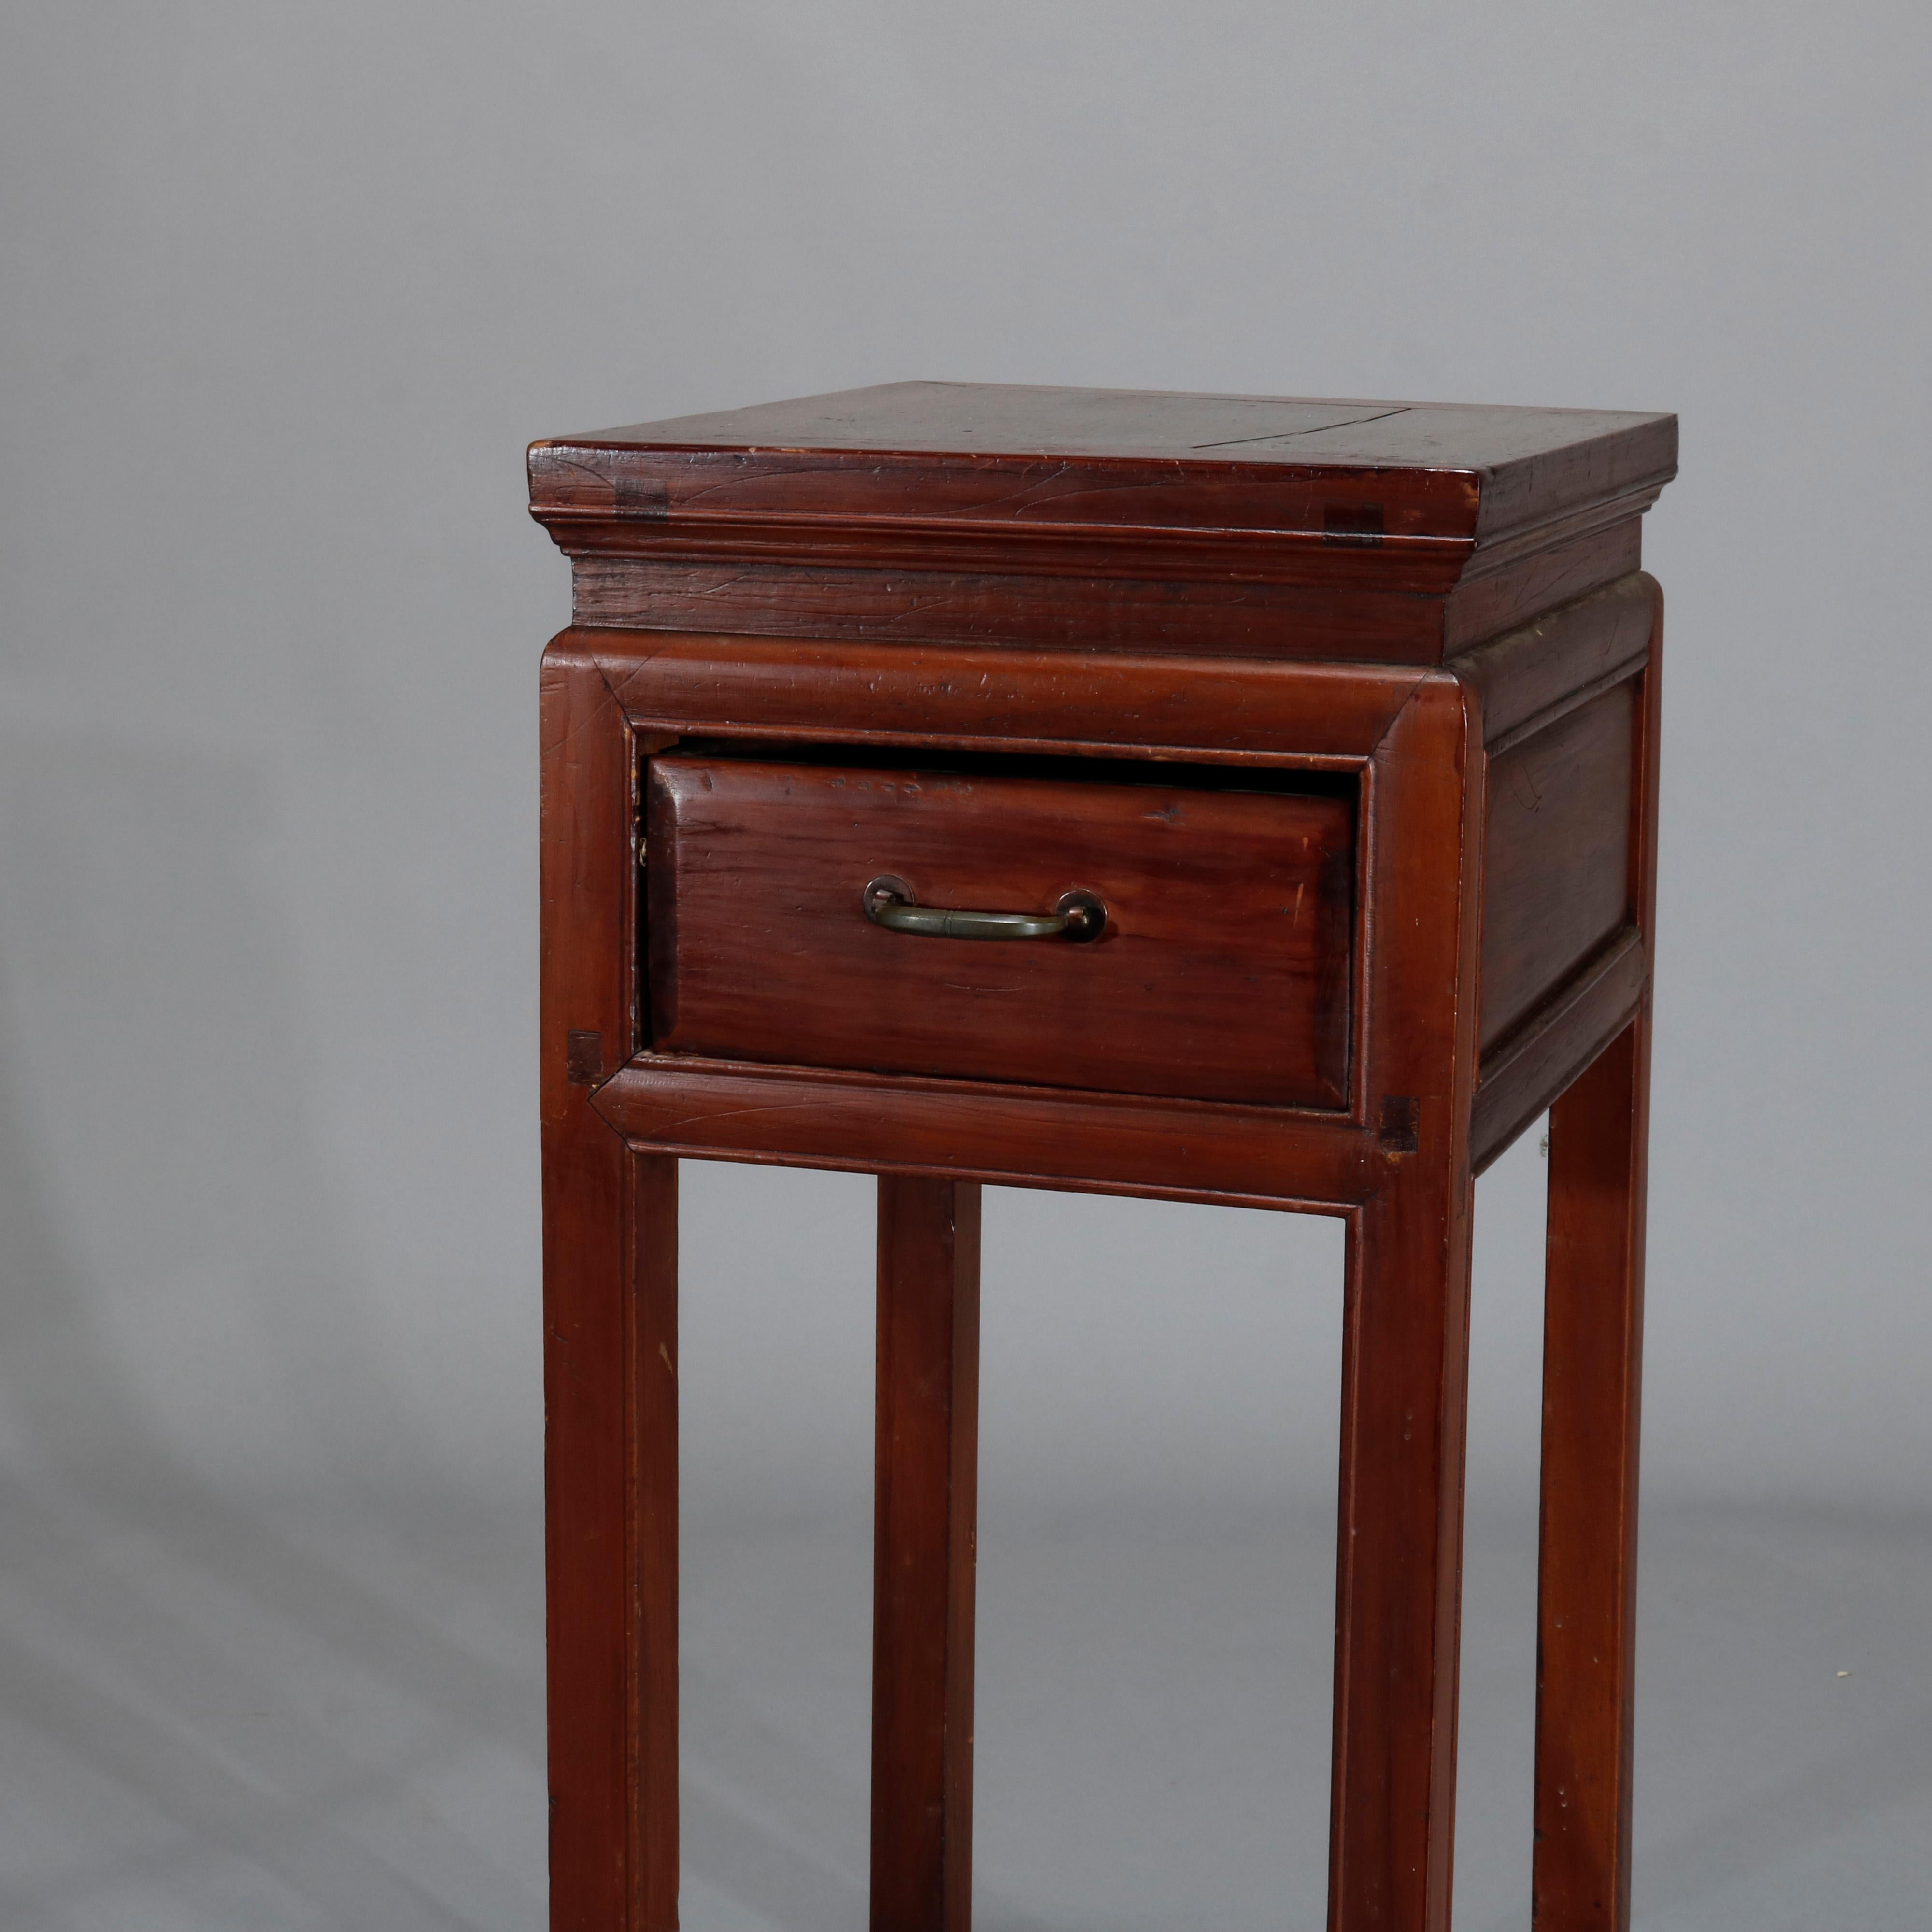 An antique Chinese side stand offers hardwood construction with single drawer having cast bronze pull and over slat lower shelf, raised on square and straight legs, 19th century

Measures: 33.75